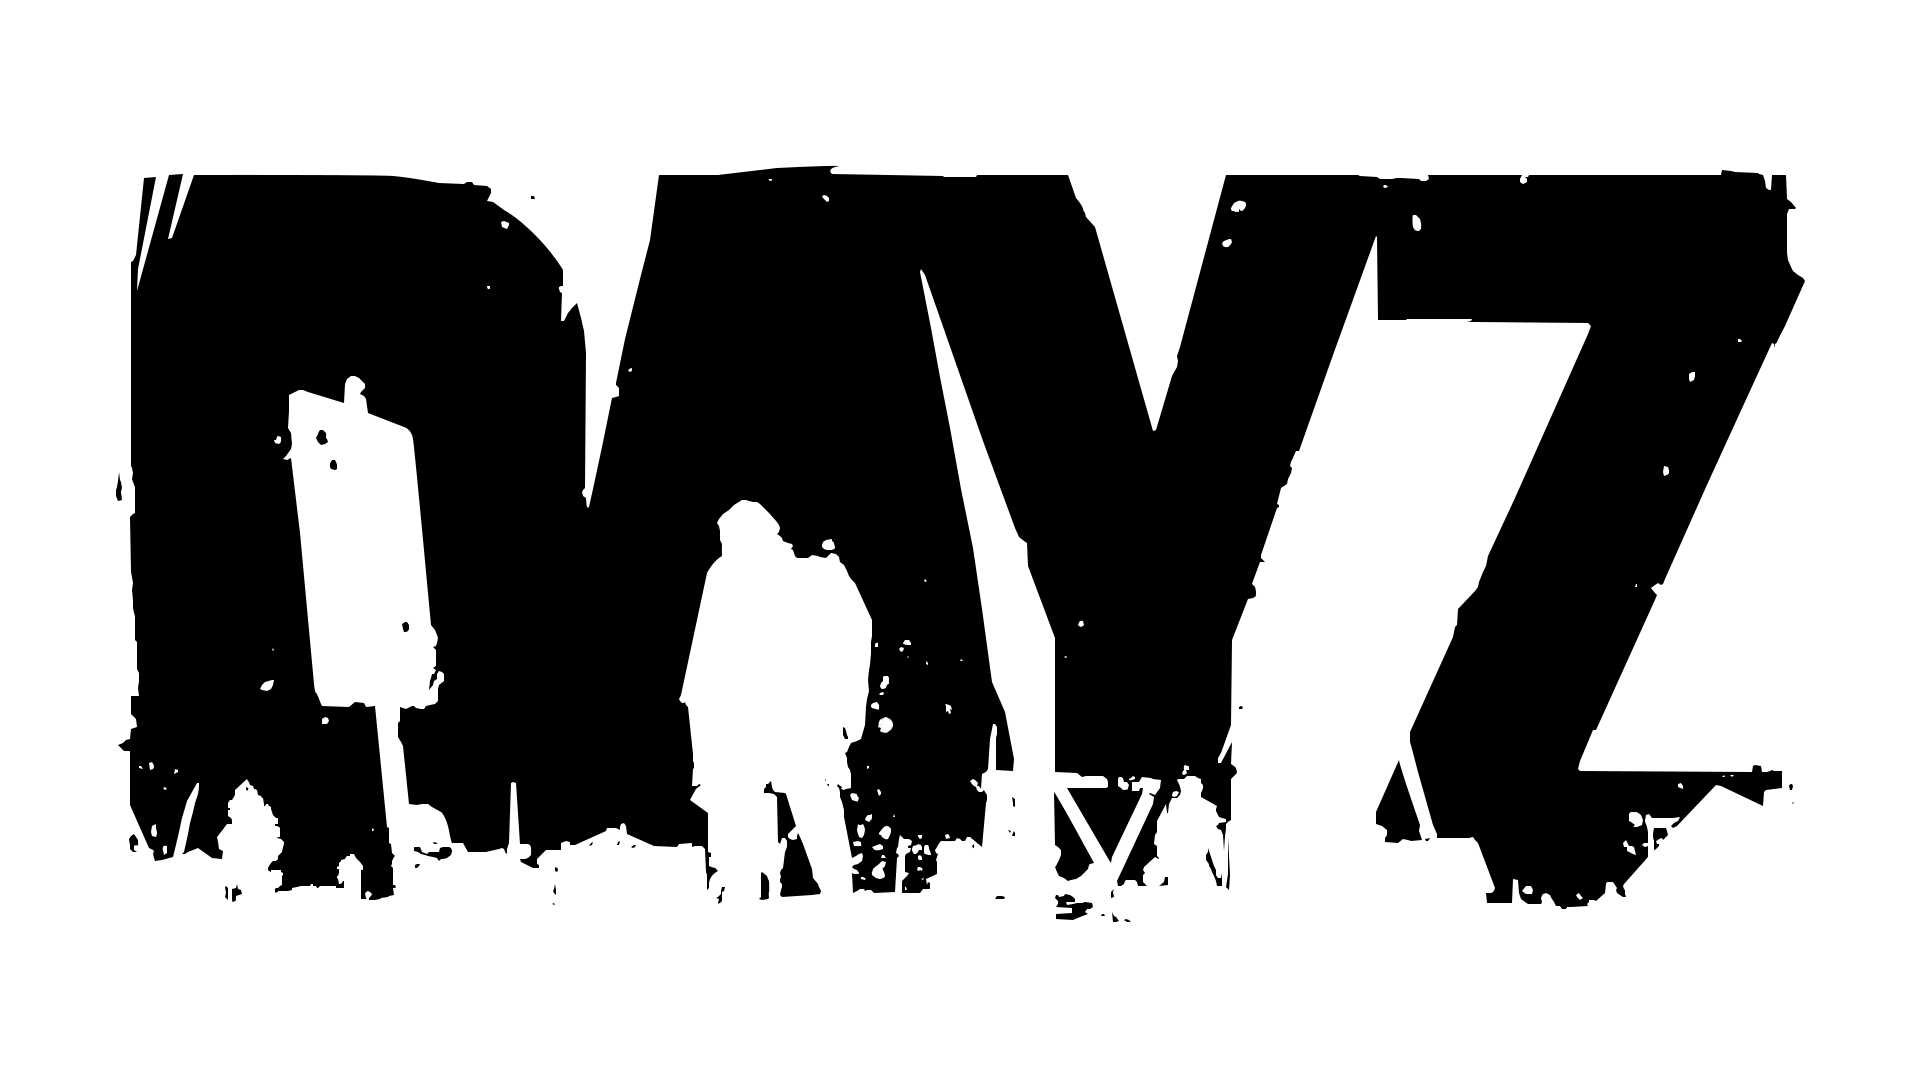 DayZ Logo - Redid the DayZ logo in a higher resolution as I couldn't find one